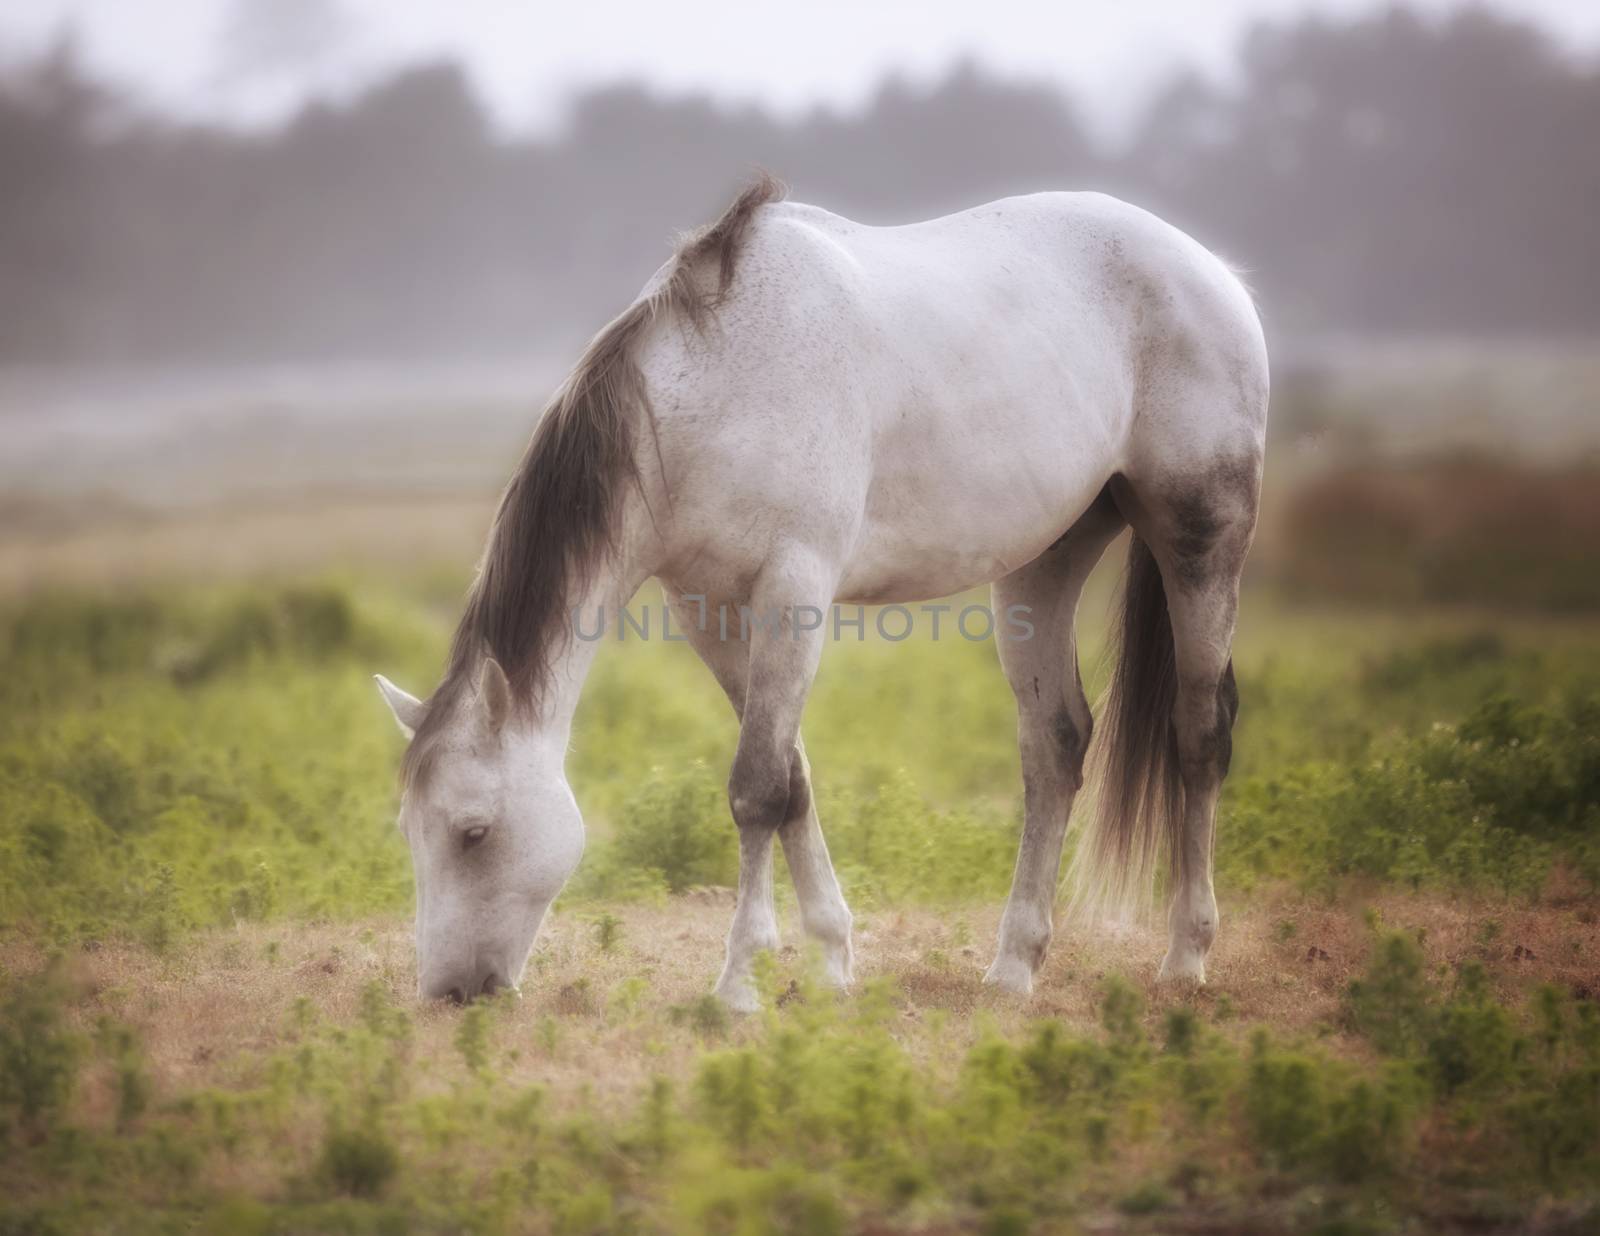 A Horse grazes in a pasture on a foggy afternoon, Northern California, USA